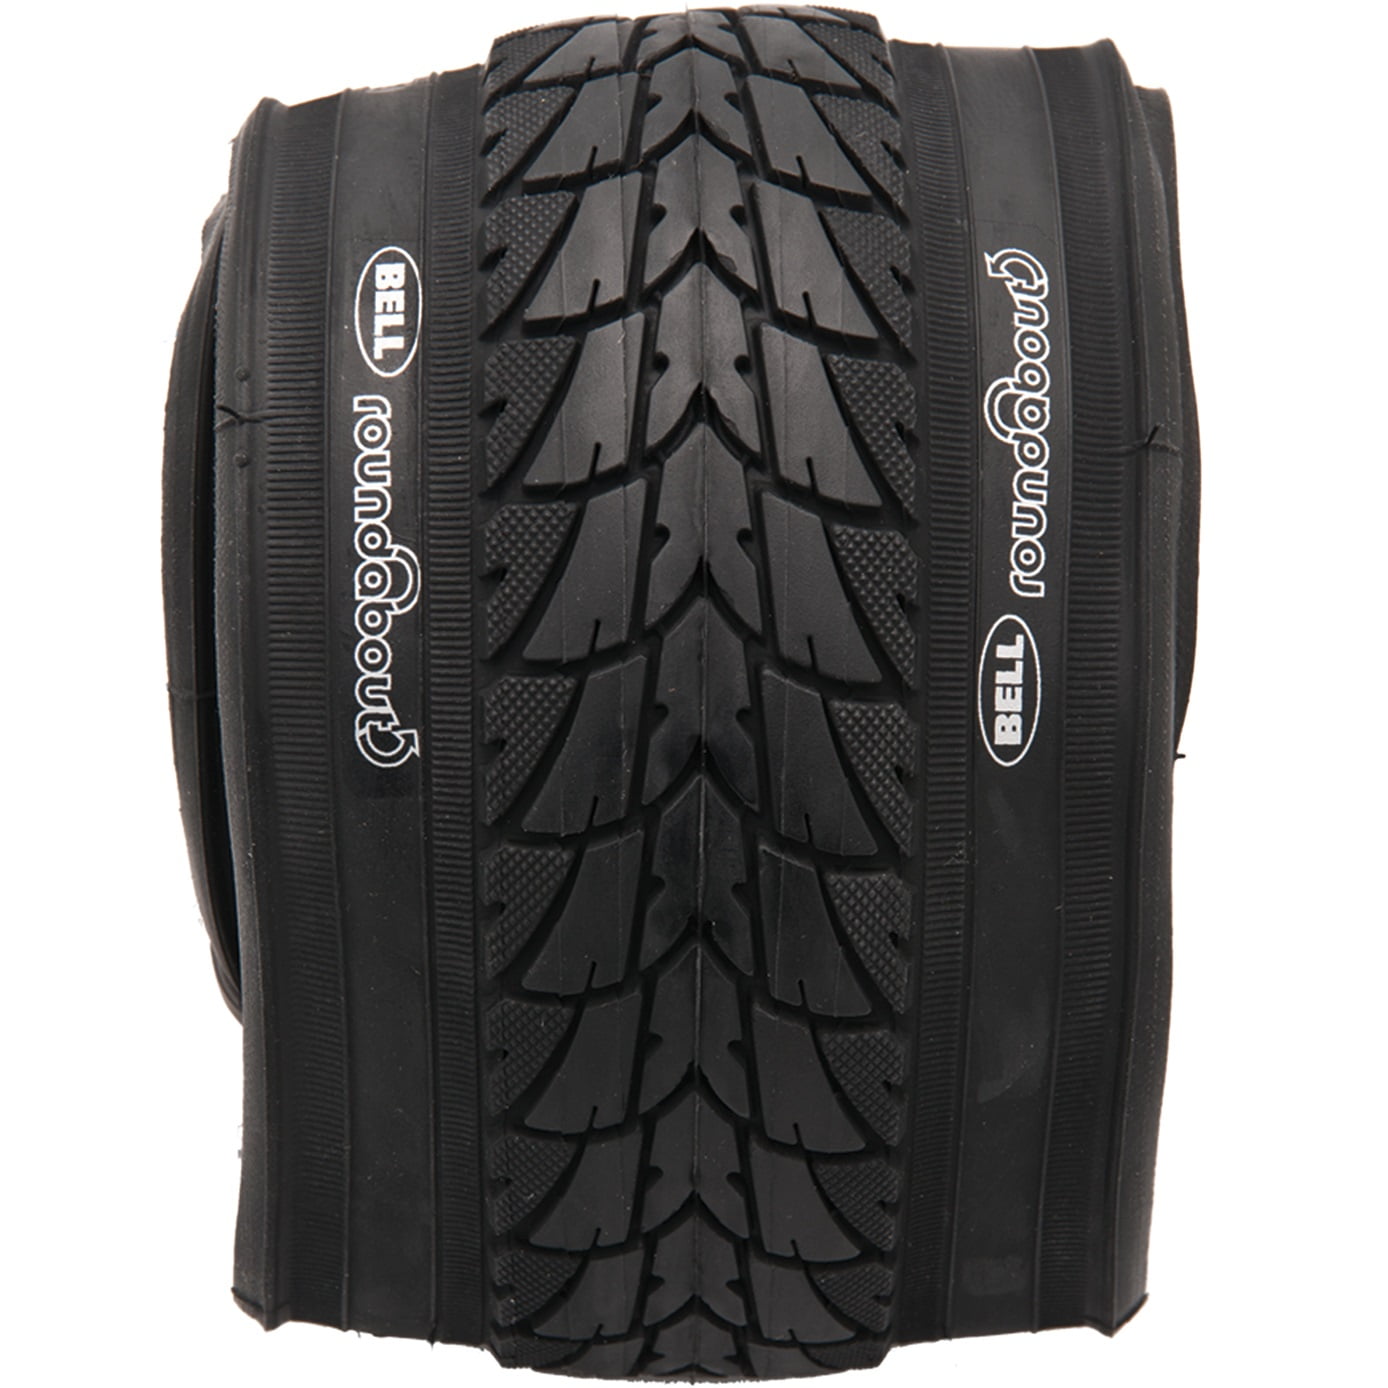 Bell Bicycle Tire Sports Comfort Roundabout Premium Commuter Tire 26" x 1.75" 